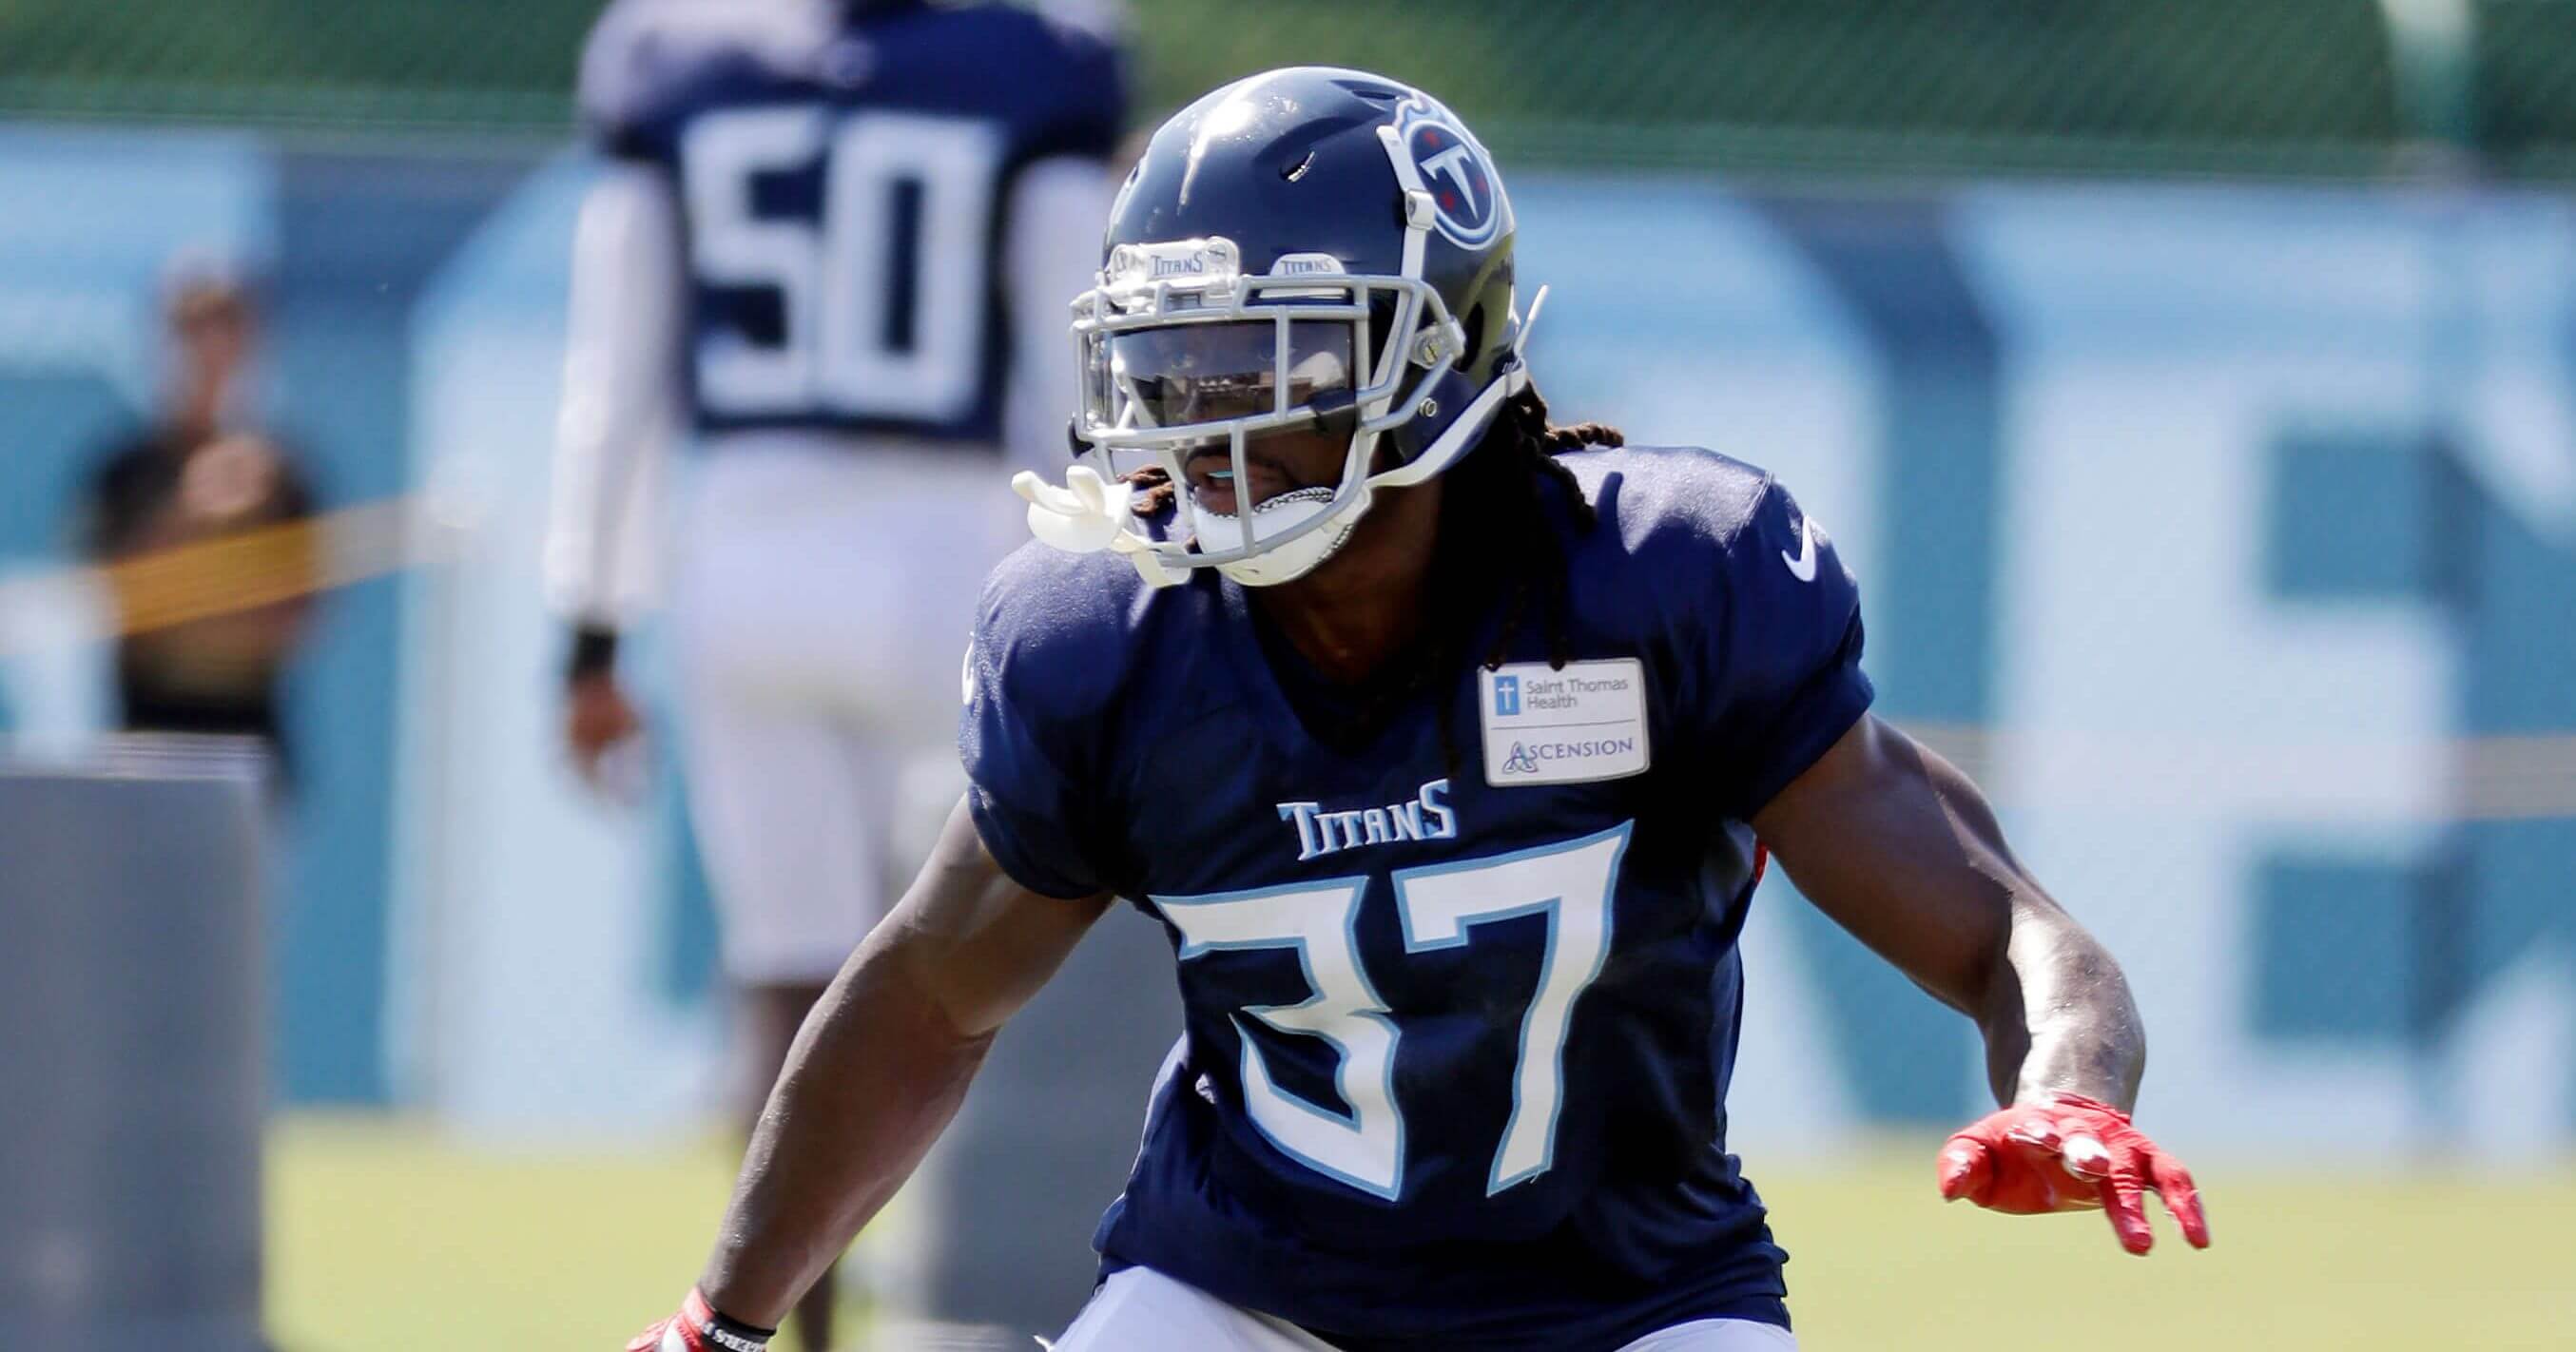 FILE - In this July 29, 2018, file photo, Tennessee Titans defensive back Johnathan Cyprien runs a drill during NFL football training camp in Nashville, Tenn. Cyprien will miss the season with a torn left ACL, and coach Mike Vrabel says veteran Eric Reid is among the safeties the Titans want to look at for a potential replacement. Cyprien left practice Wednesday, Aug. 1, 2018, after grabbing at his left knee.